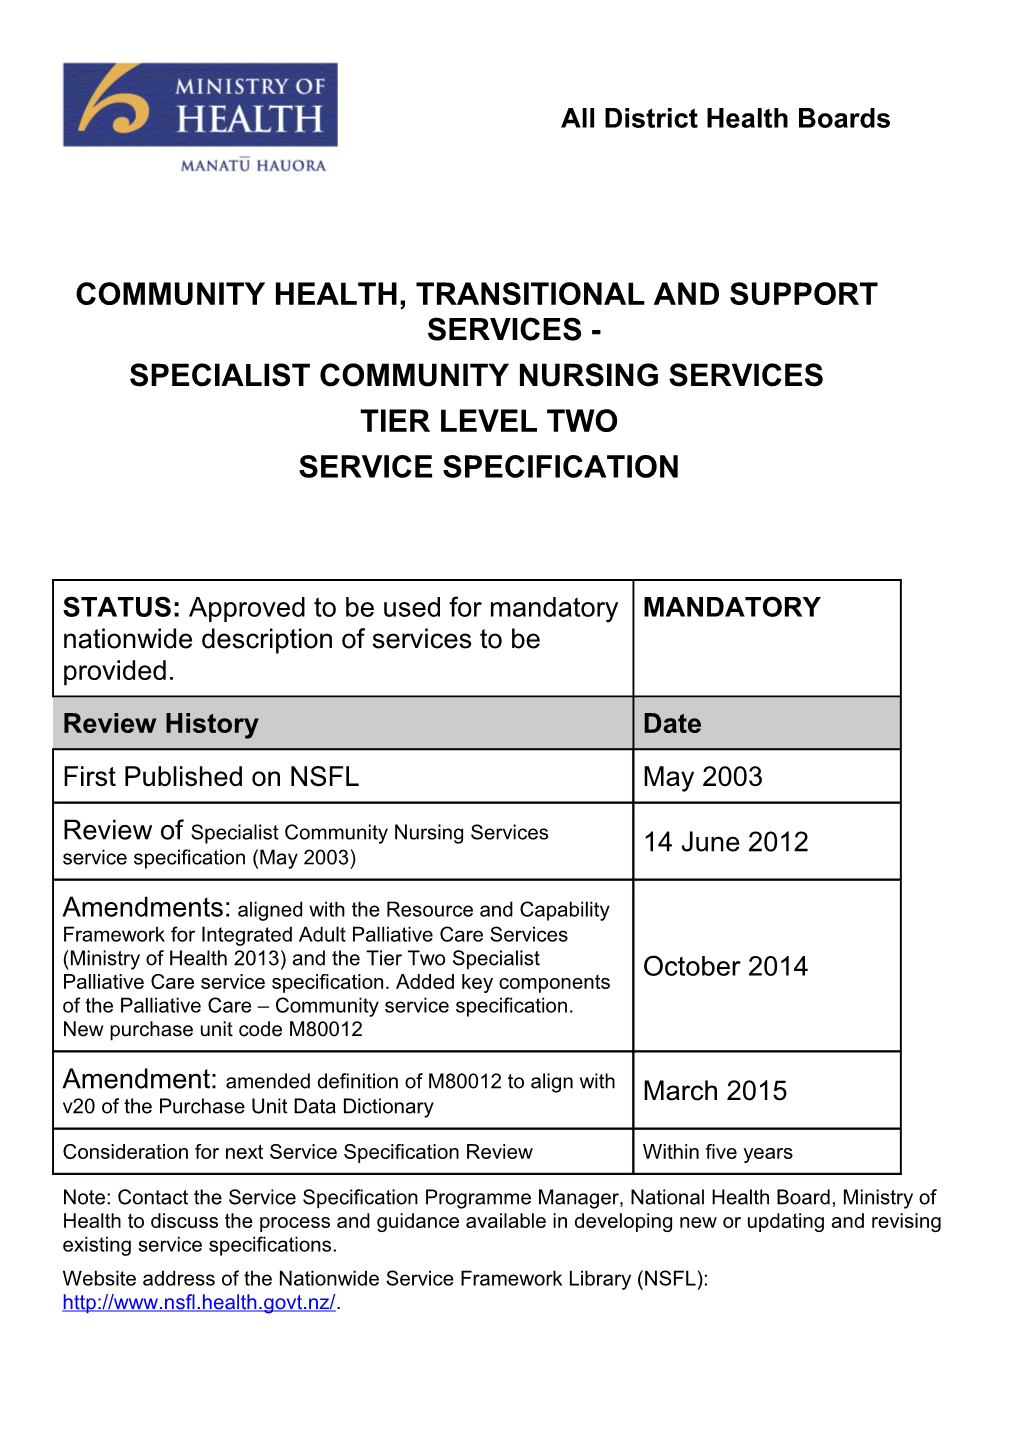 Community Health, Transitionaland Support Services